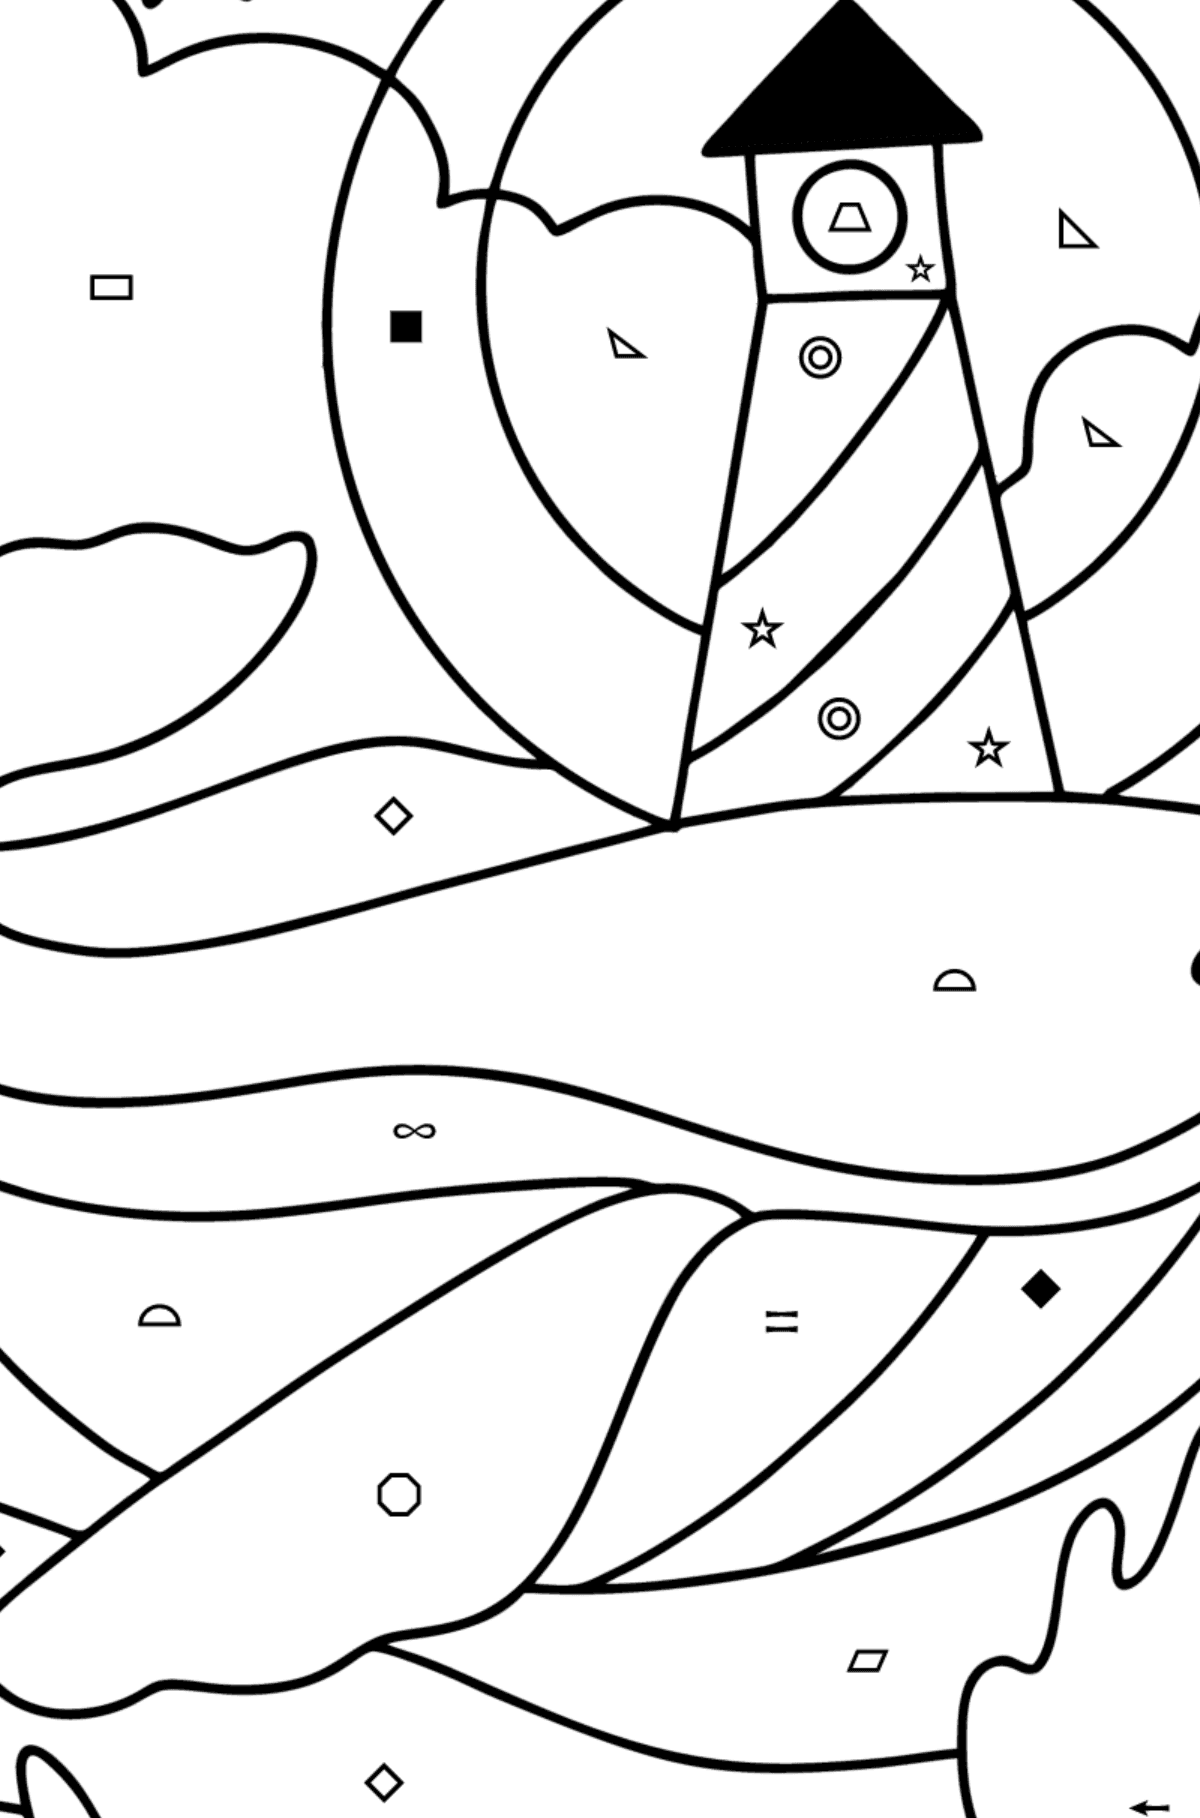 Whale with lighthouse coloring page - Coloring by Symbols and Geometric Shapes for Kids